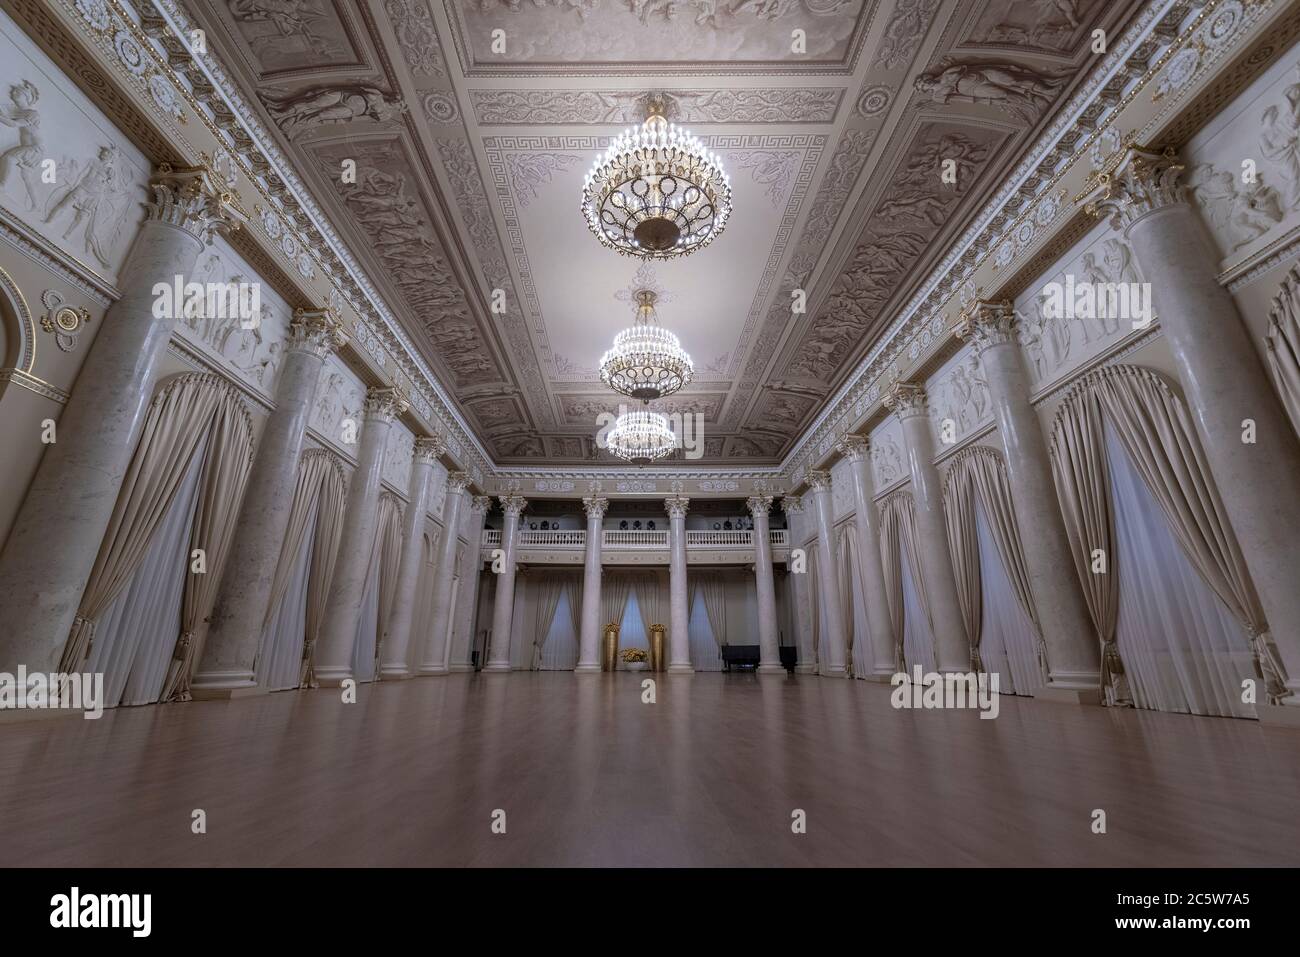 SAINT PETERSBURG. RUSSIA. Interior of Shuvalov Palace now housing the Faberge Museum in St. Petersburg Stock Photo